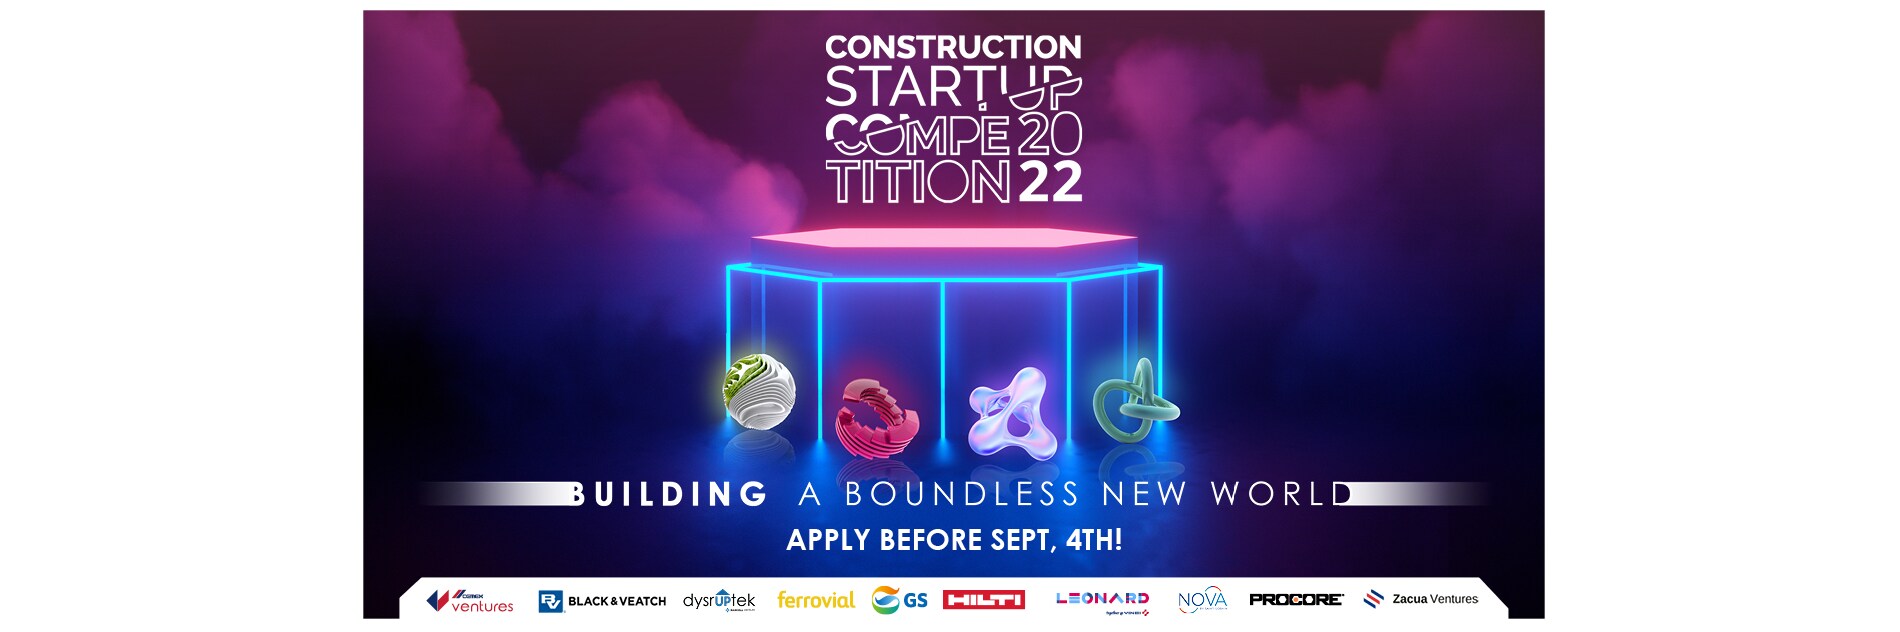 Construction startup competition 2022